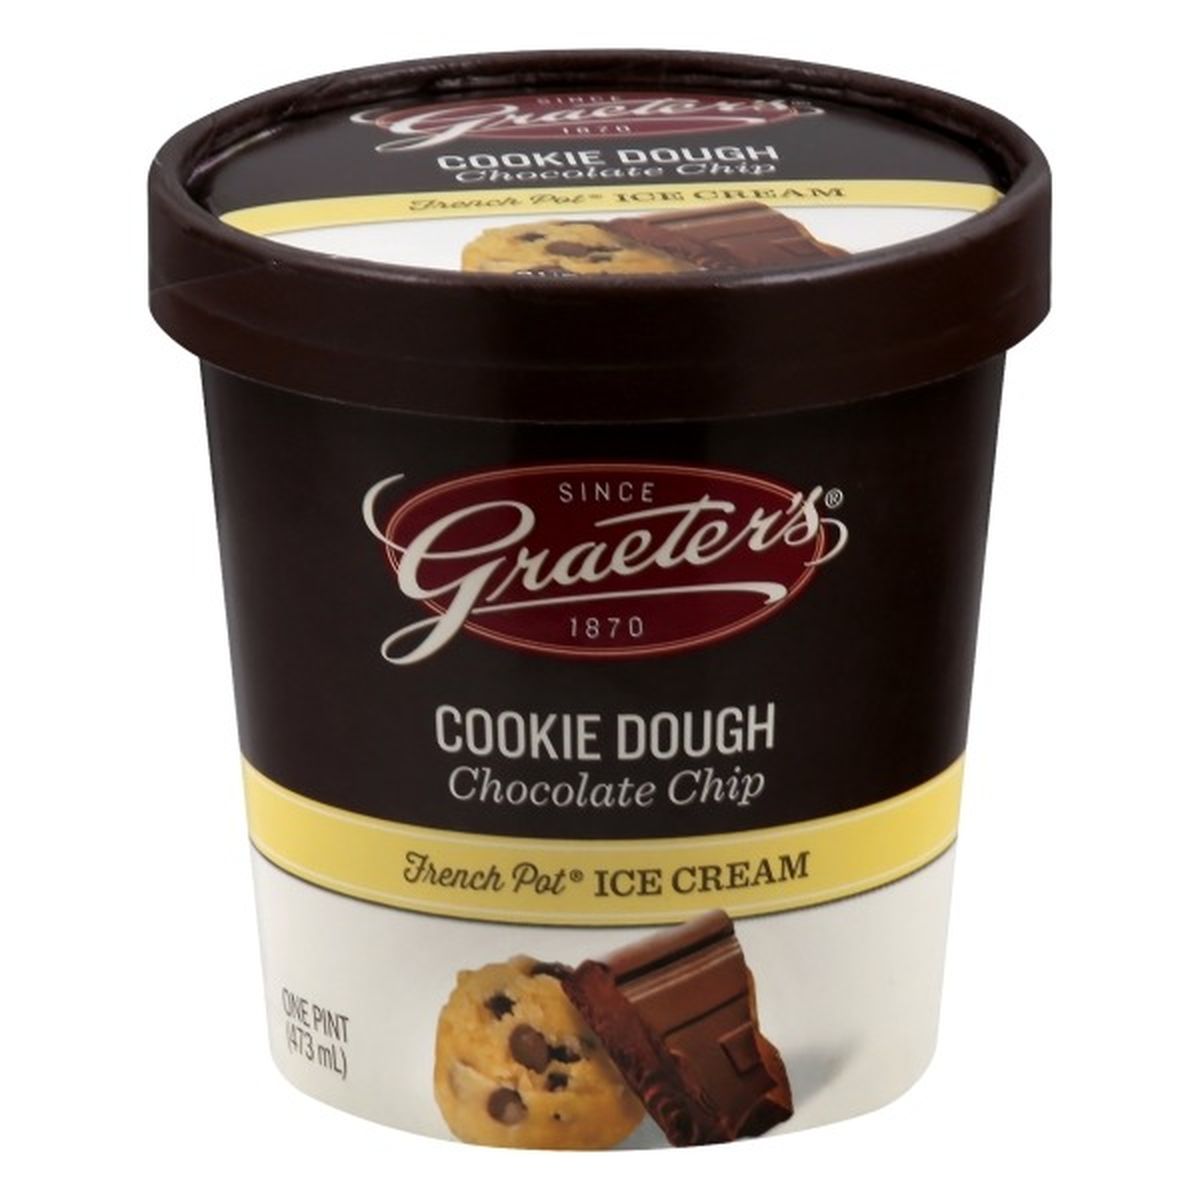 Calories in Graeter's Ice Cream, French Pot, Cookie Dough Chocolate Chip